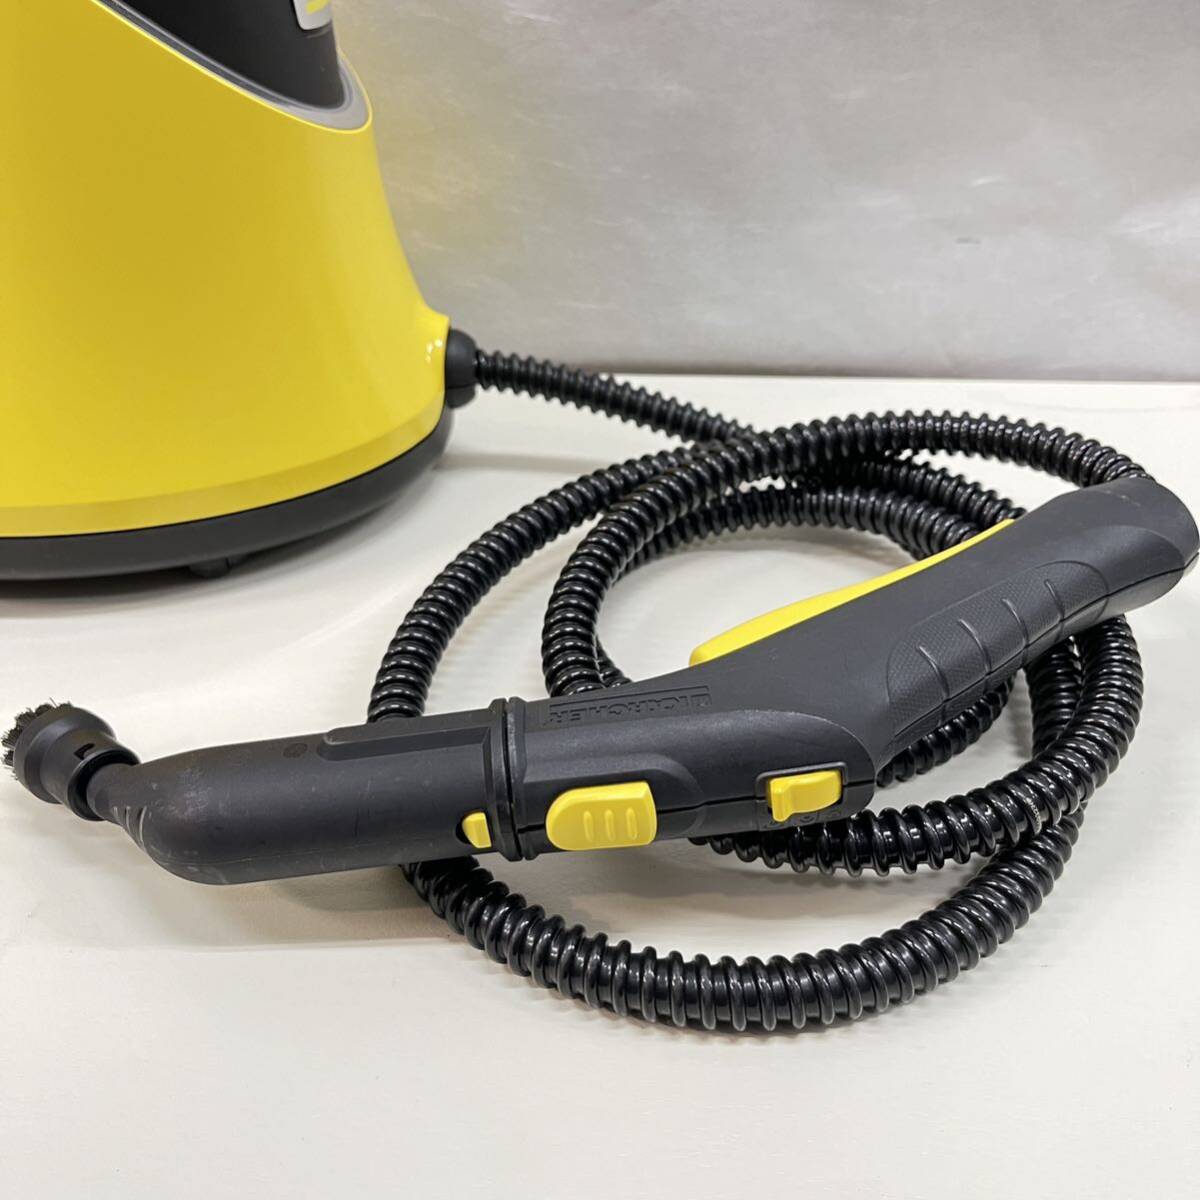  Karcher steam cleaner cleaning yellow SC JTK 20 2018 year made operation verification ending (05066 average )